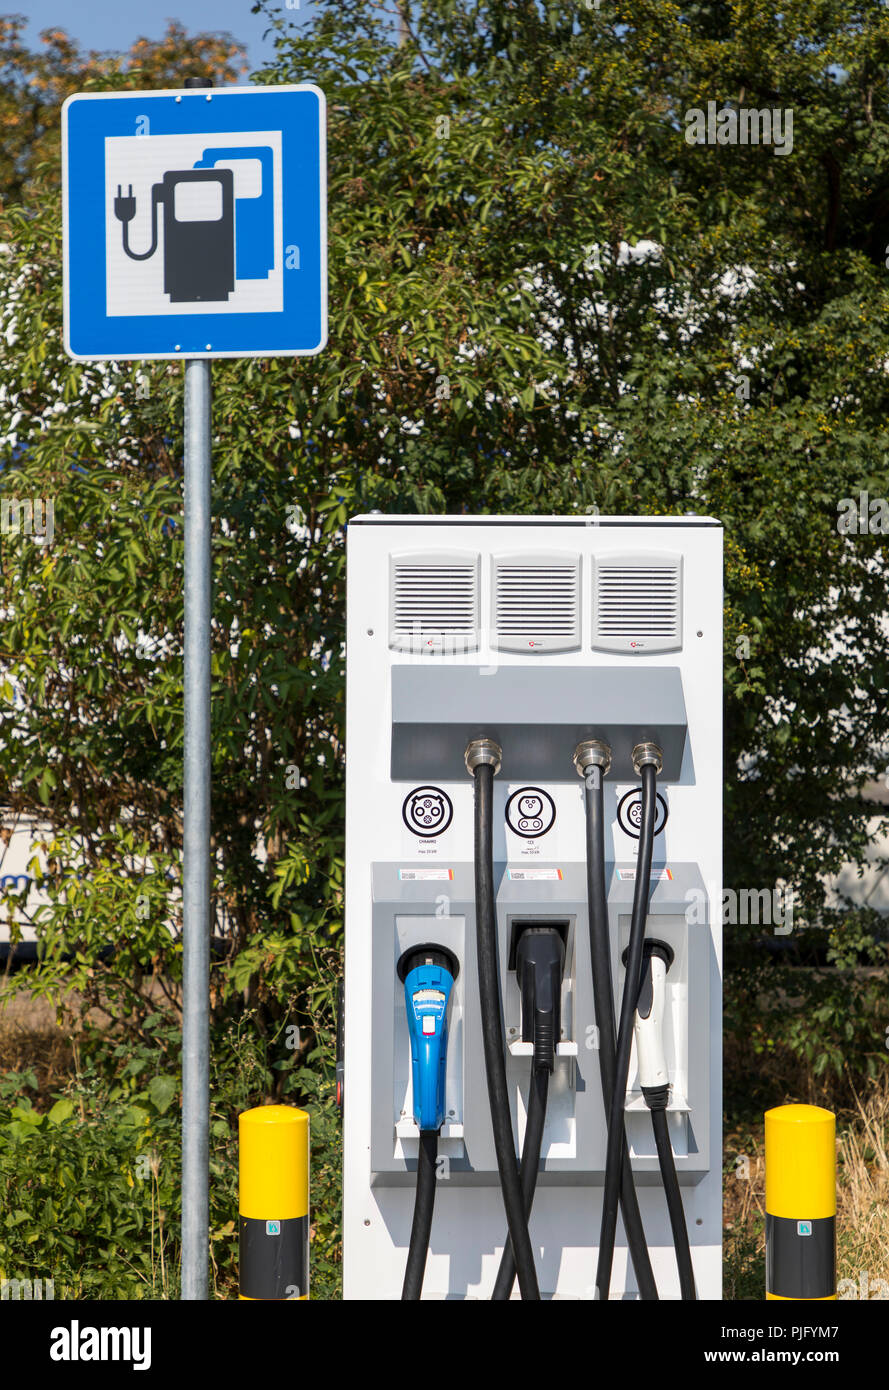 Charging station for electric vehicles, with charging cable and plug for various models, on a motorway service area, Germany Stock Photo